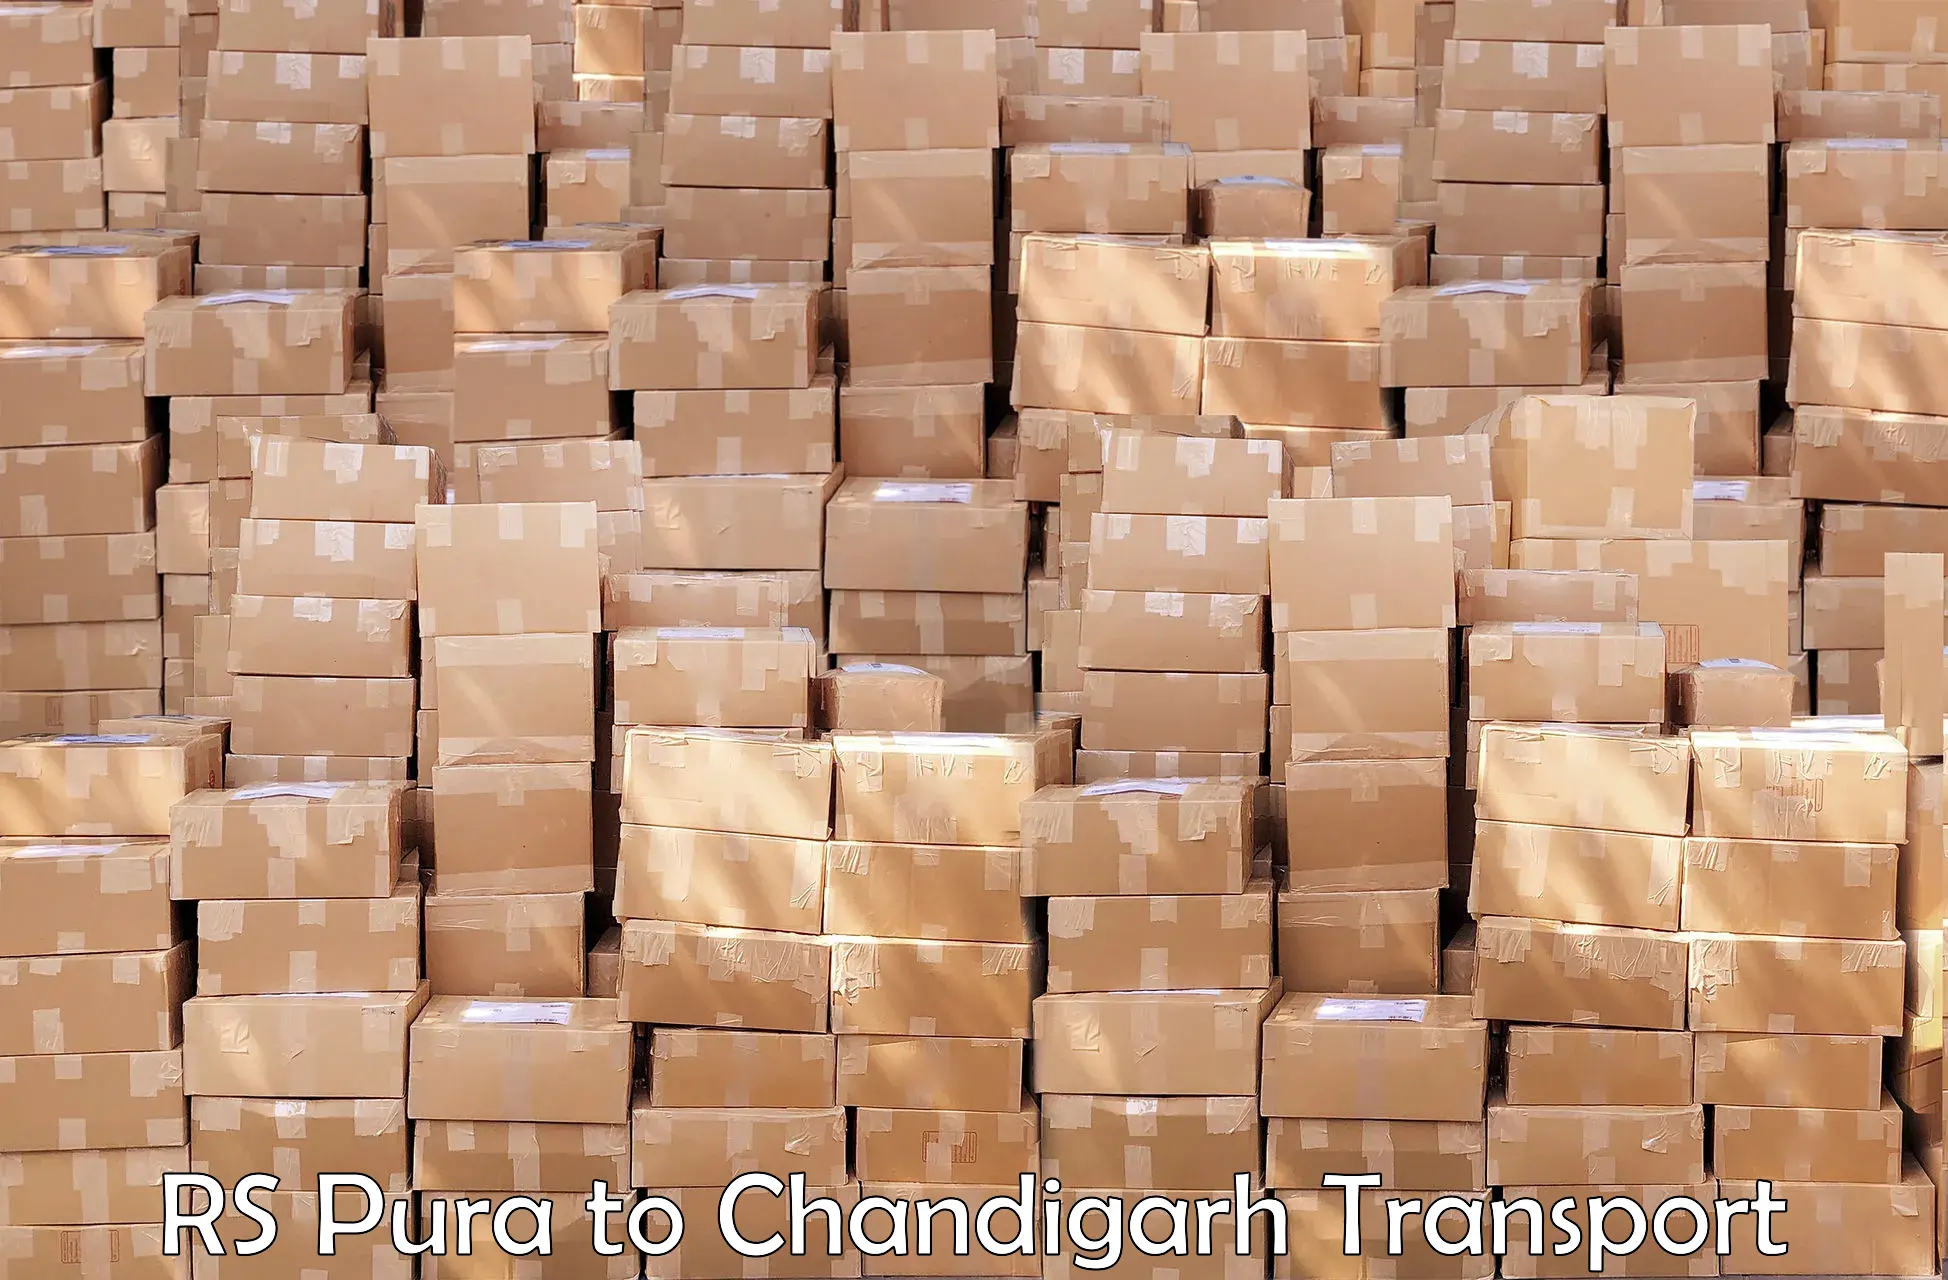 Daily parcel service transport in RS Pura to Chandigarh